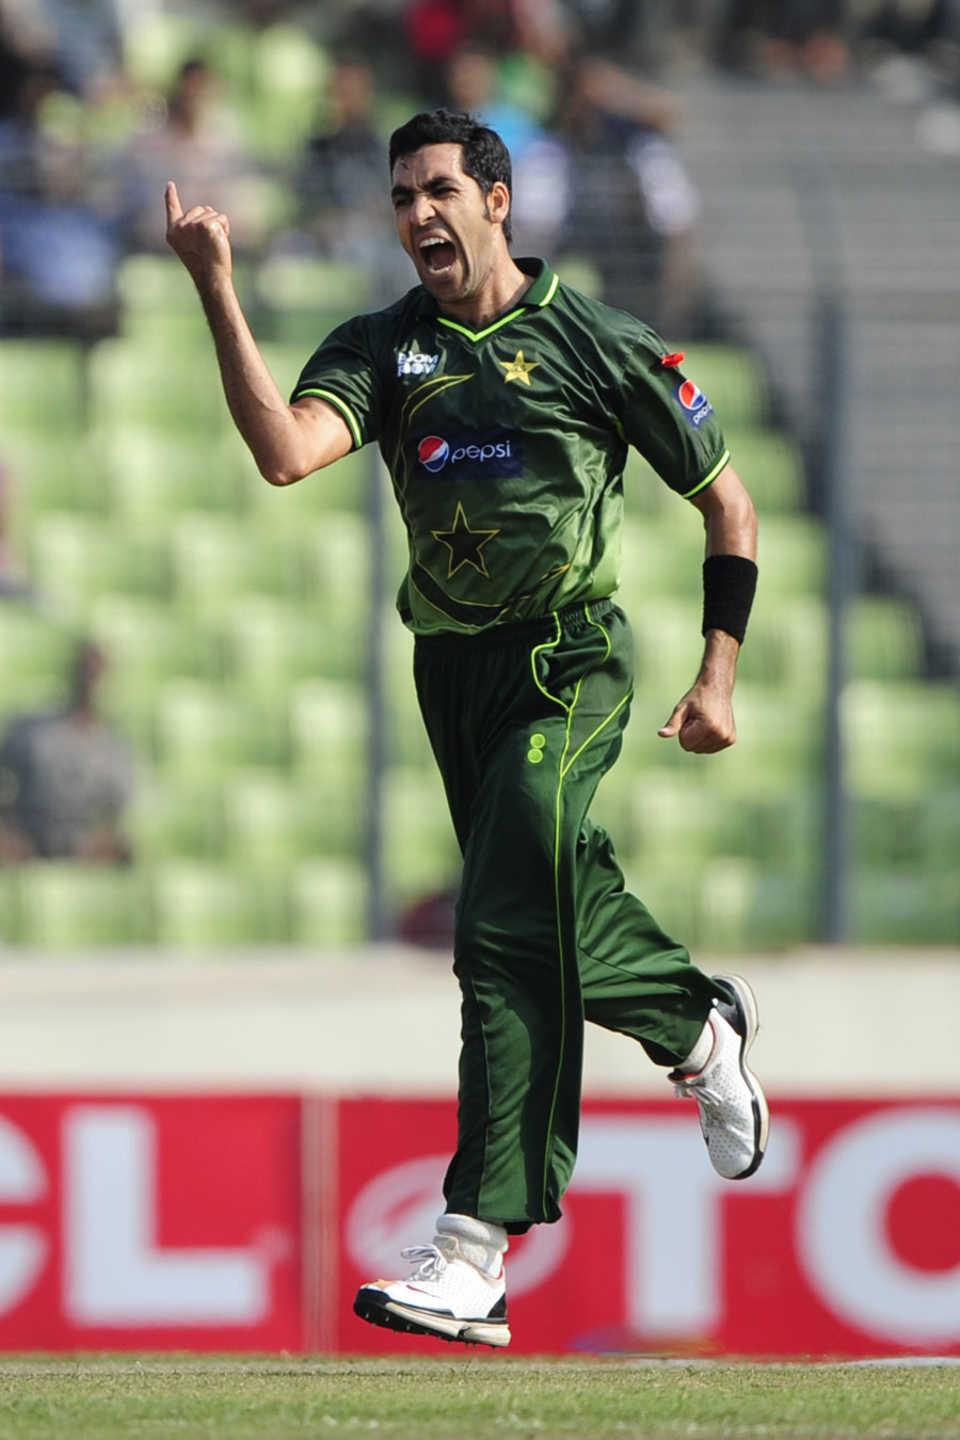 Umar Gul is pumped up after taking a wicket, Bangladesh v Pakistan, 1st ODI, Mirpur, December 1, 2011